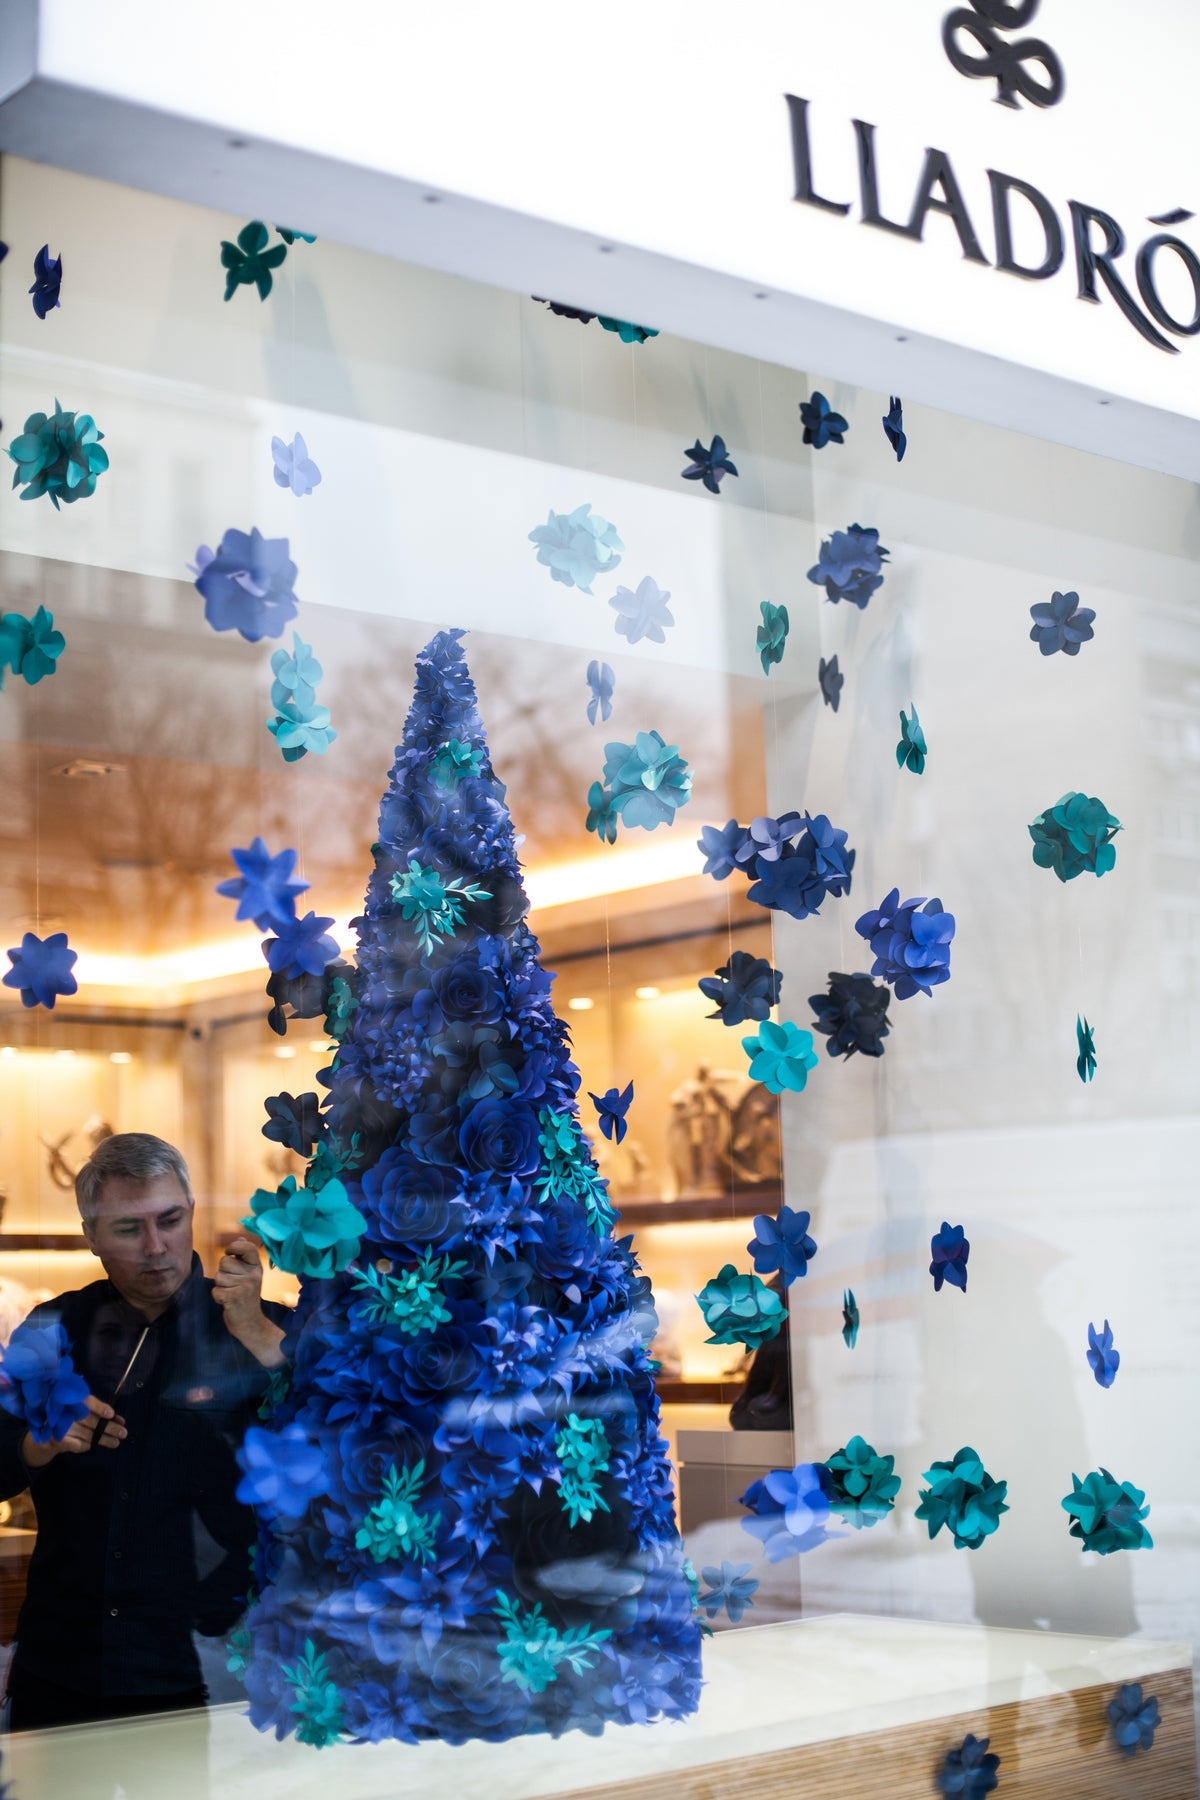 Whimsical paper flower installation featuring a Christmas tree adorned with ultramarine blue and turquoise blue paper flowers and hanging paper hydrangeas.